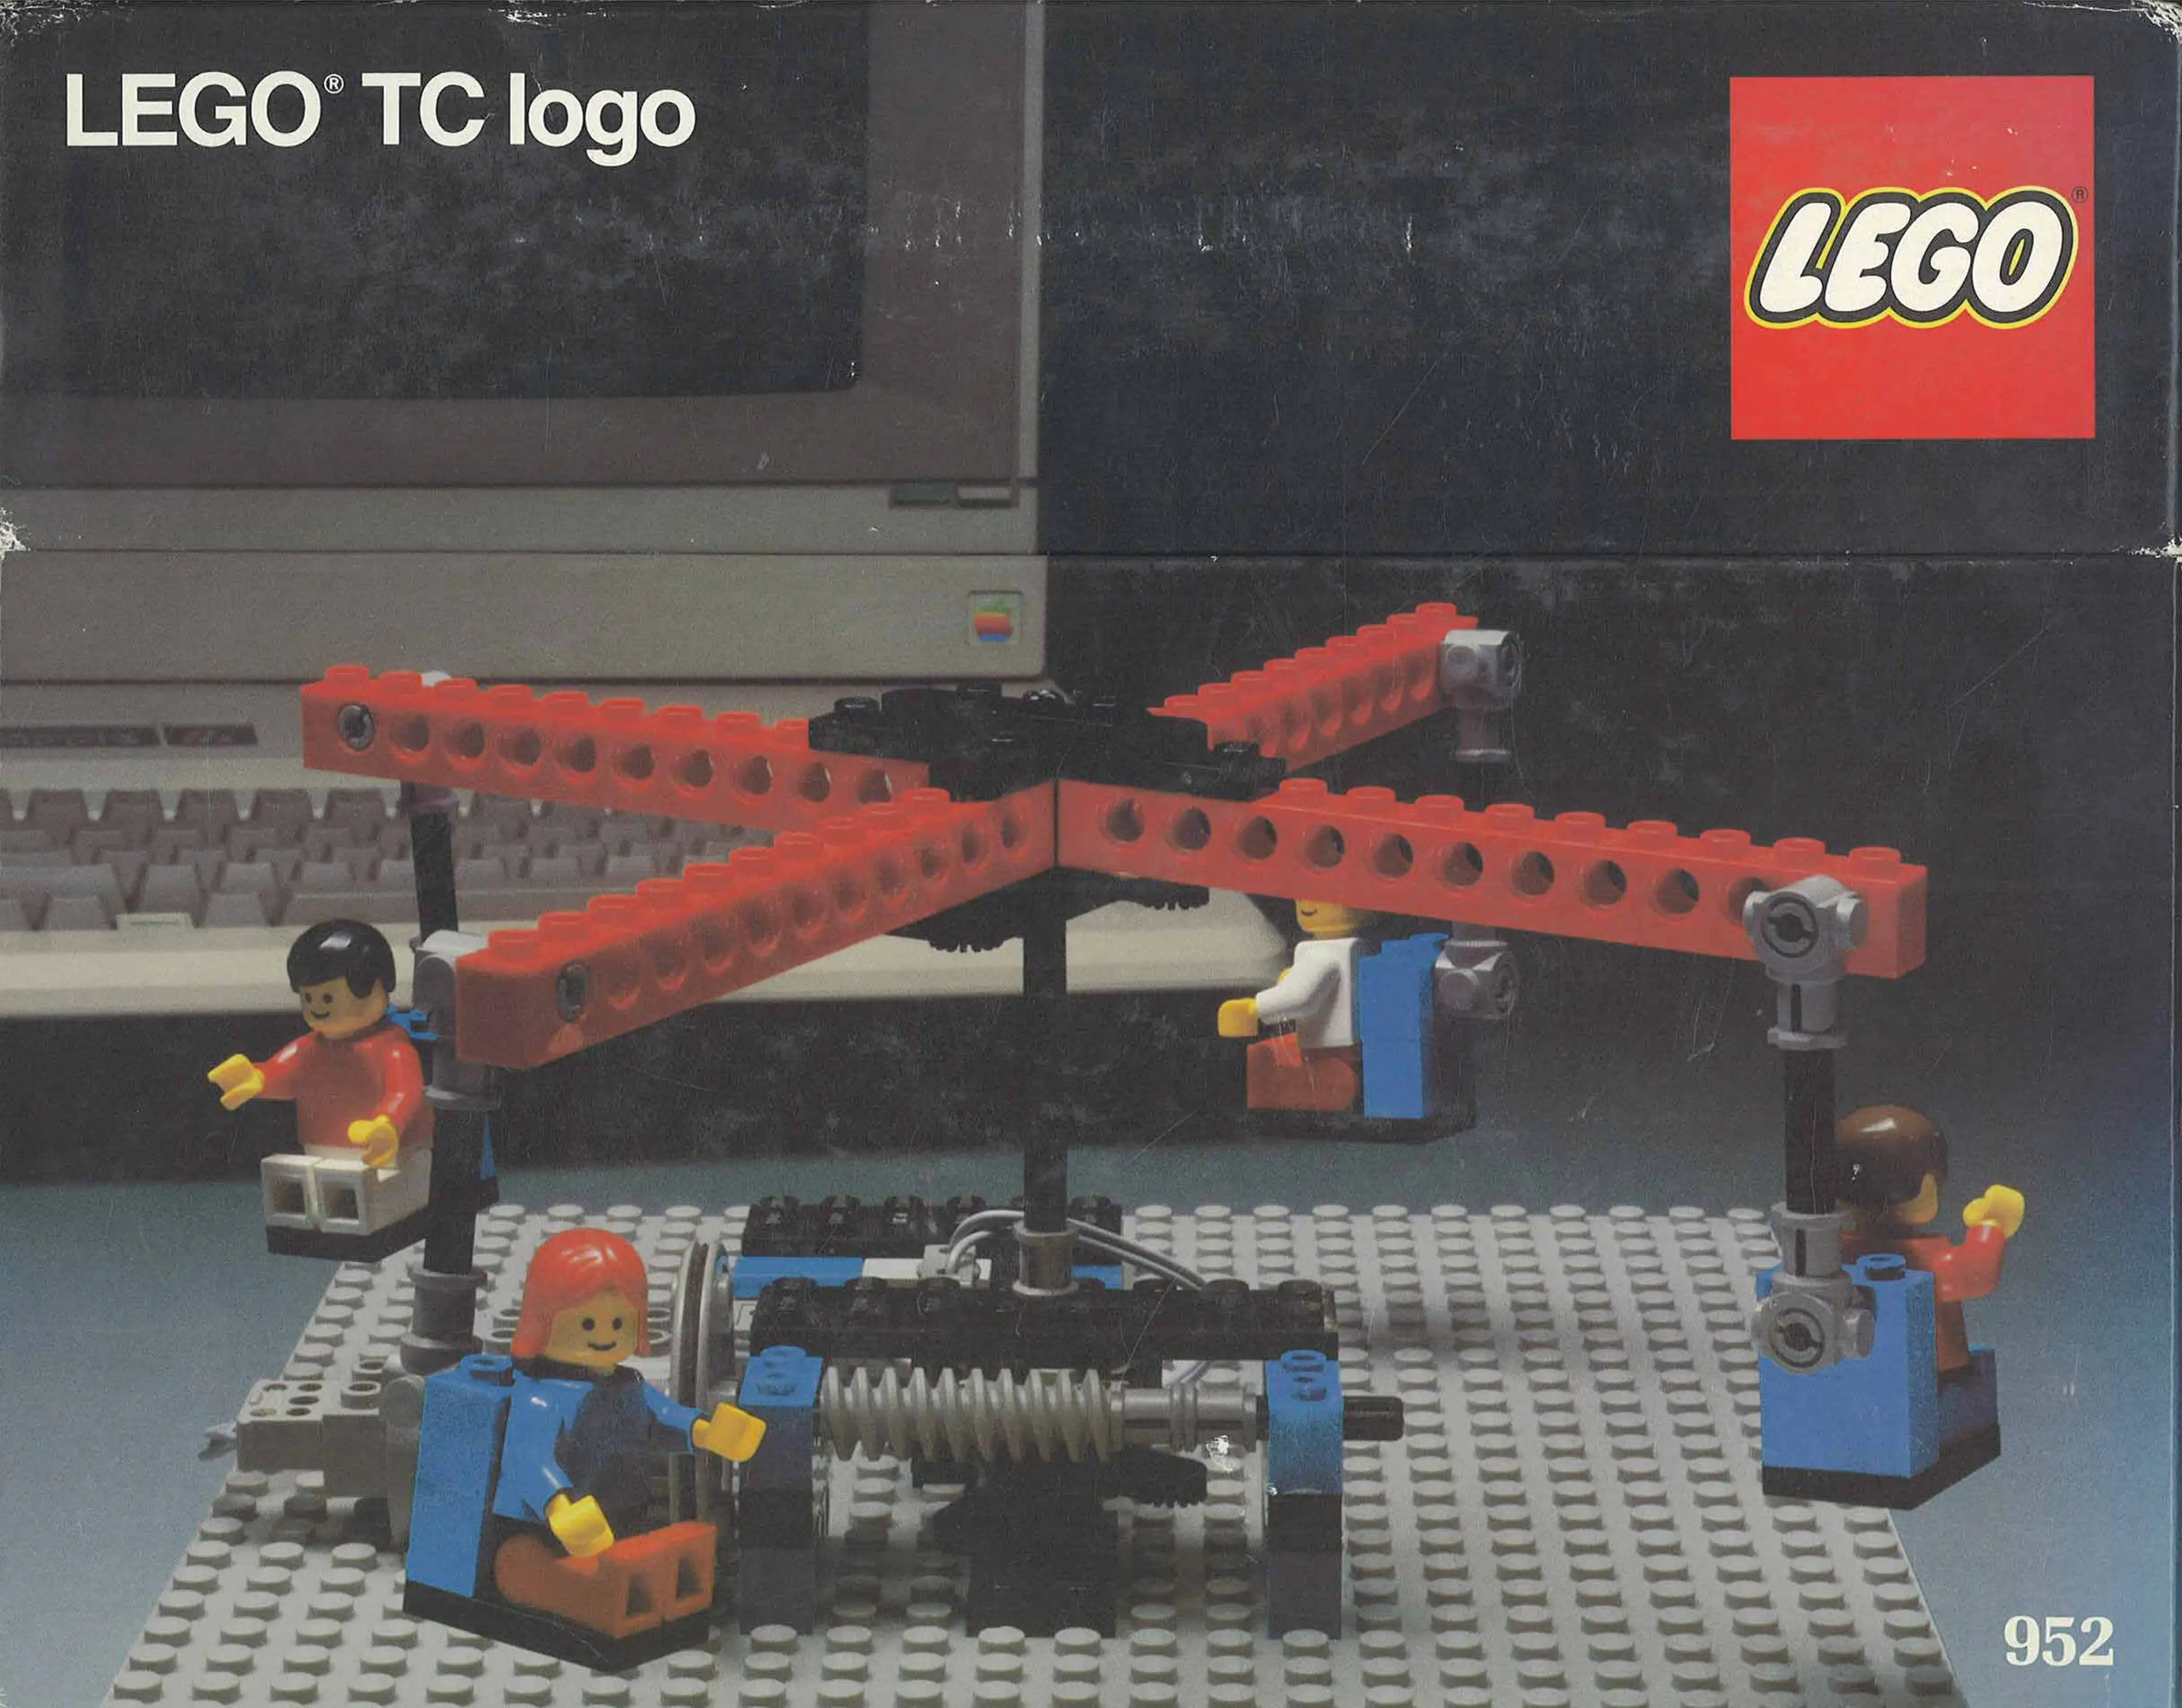 front of LEGO Education Technic Control set